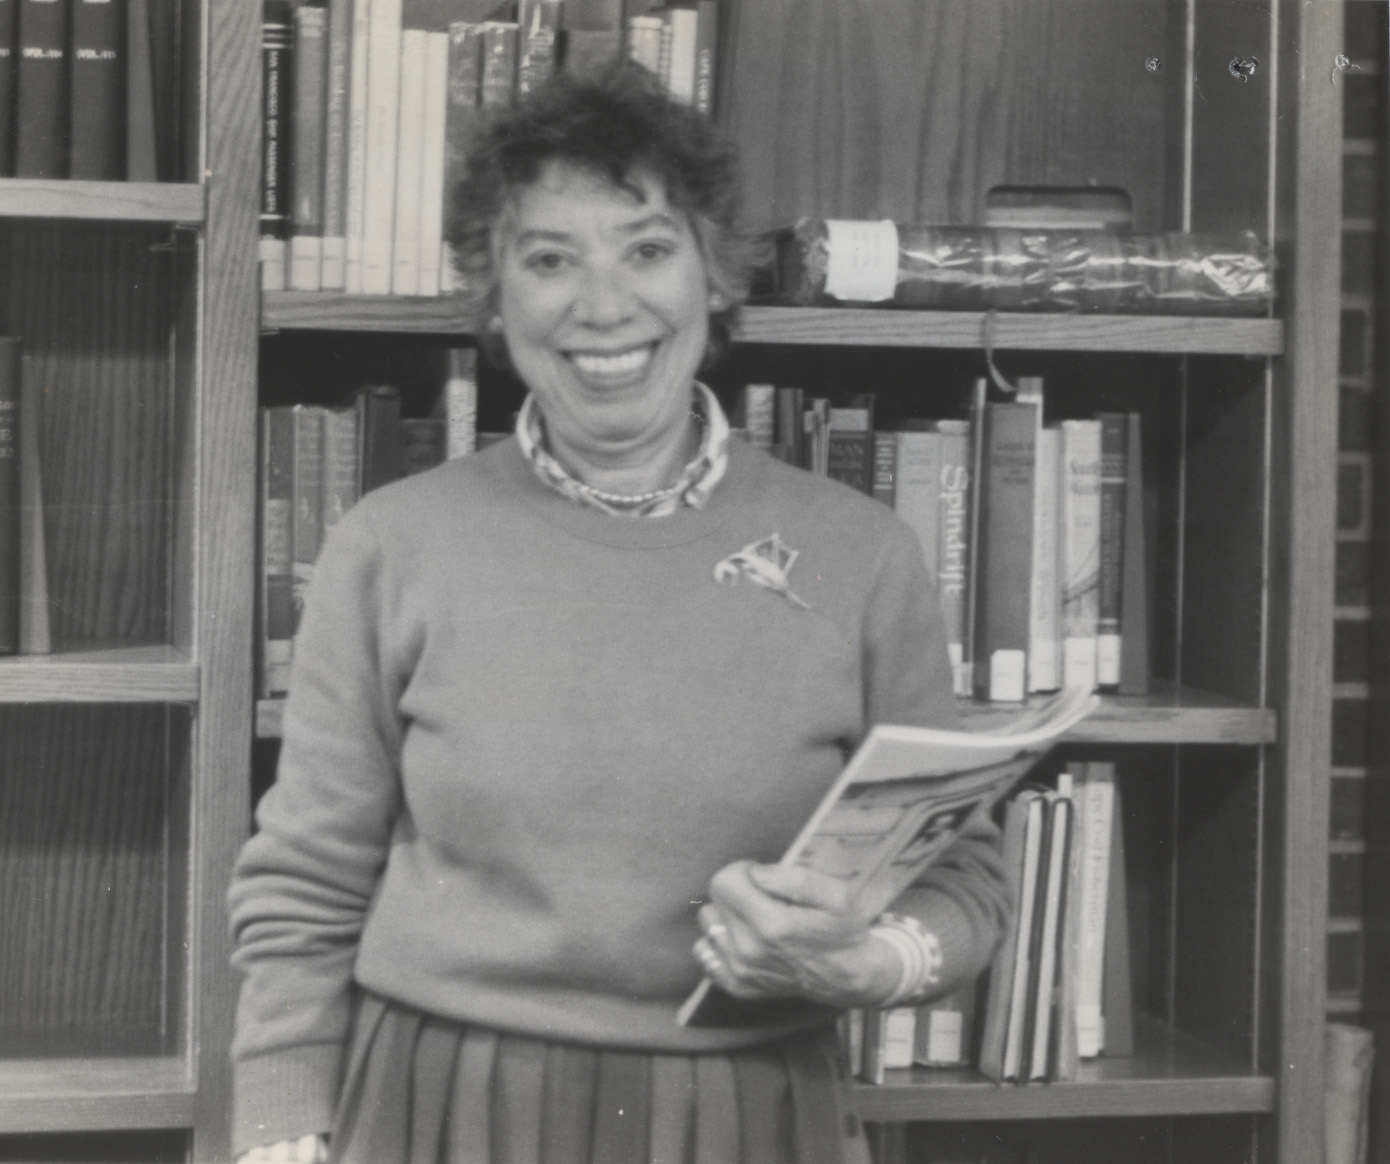 a black and white photo of a woman against a background of books, she is holding a periodical